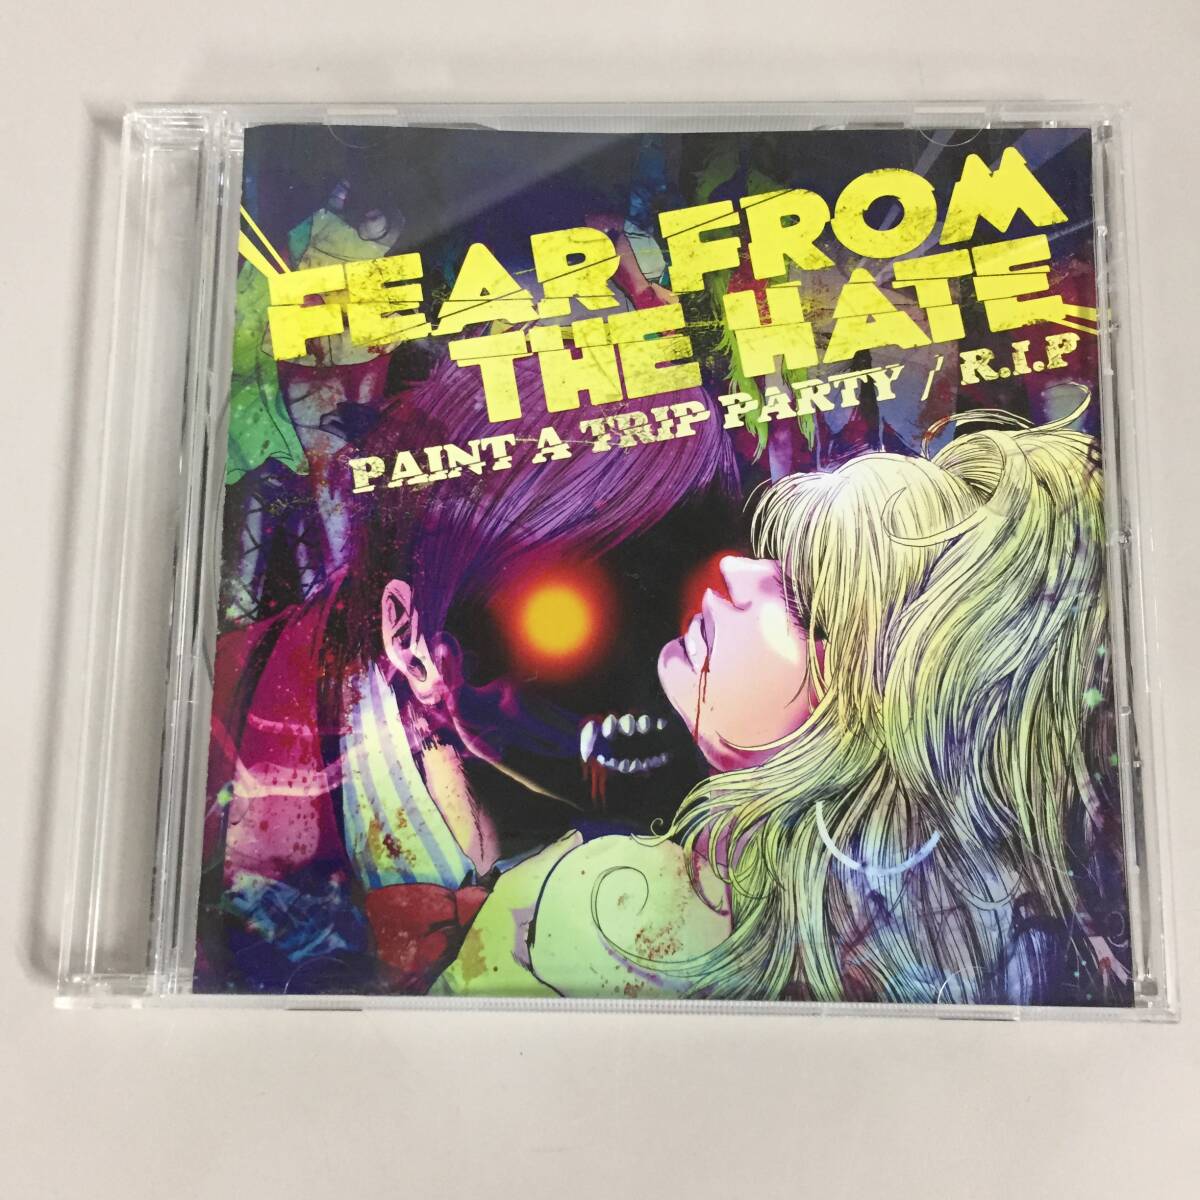 ◆DISC美品 FEAR FROM THE HATE / PAINT A TRIP PARTY / R.I.P CD　【24/0330/01_画像1